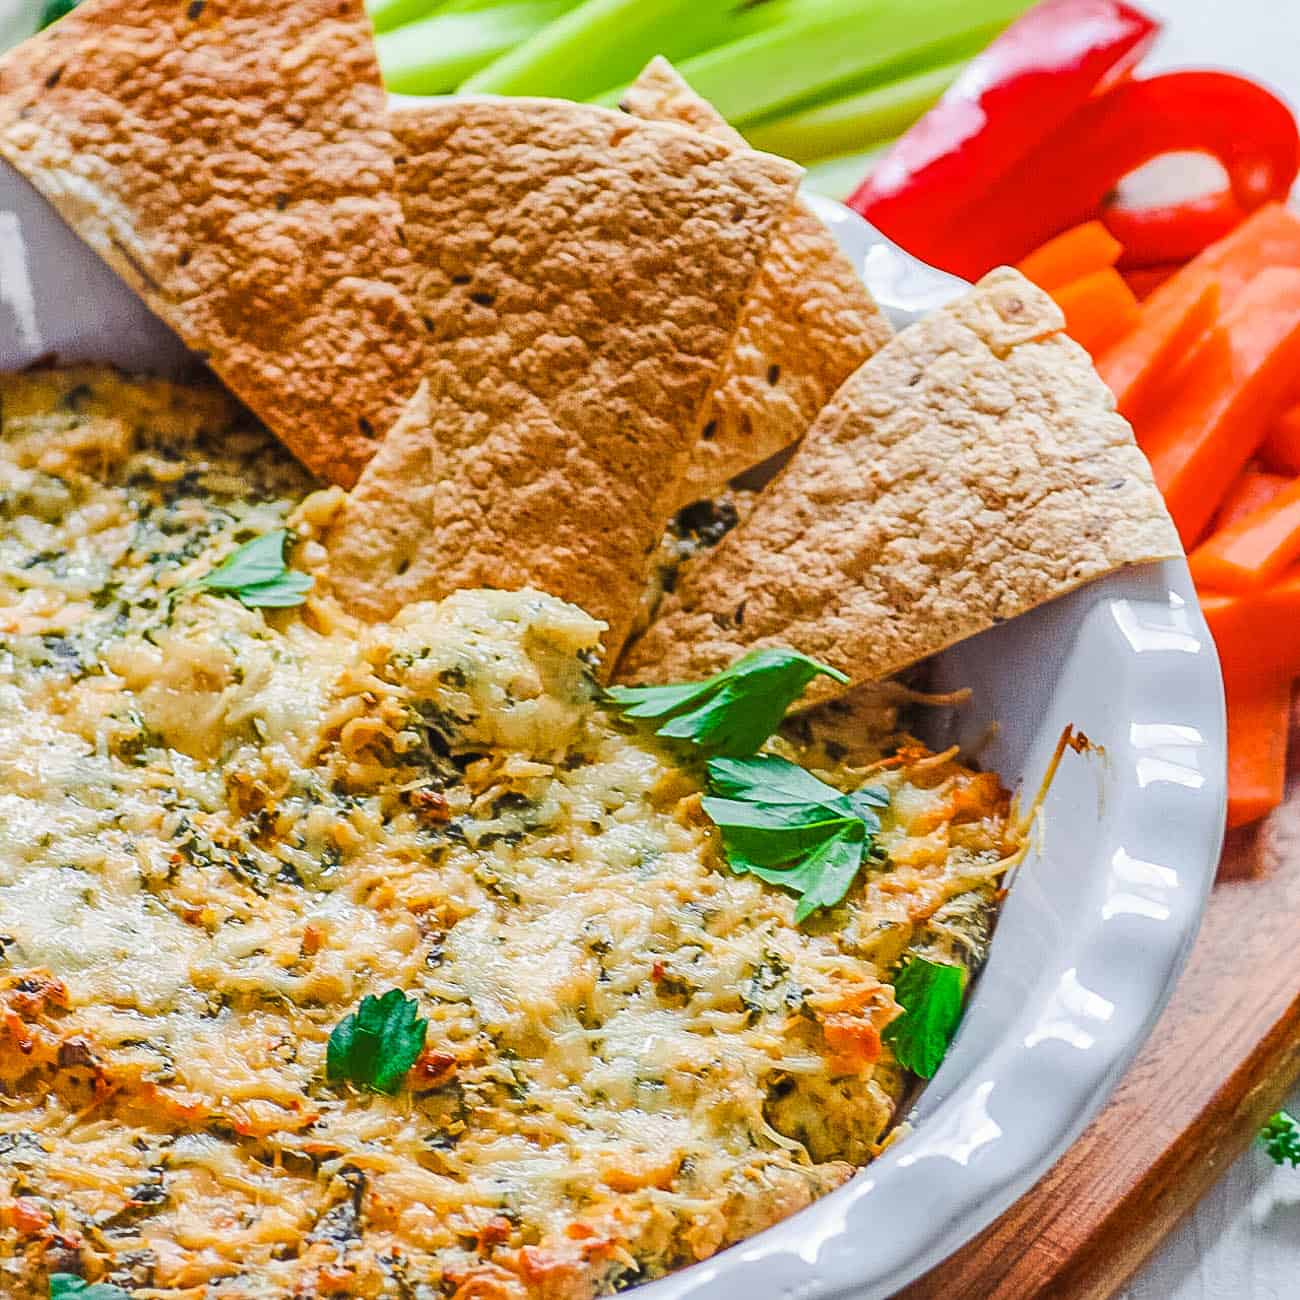 healthy cheese dip - kale dip recipe with pita chips in a white bowl